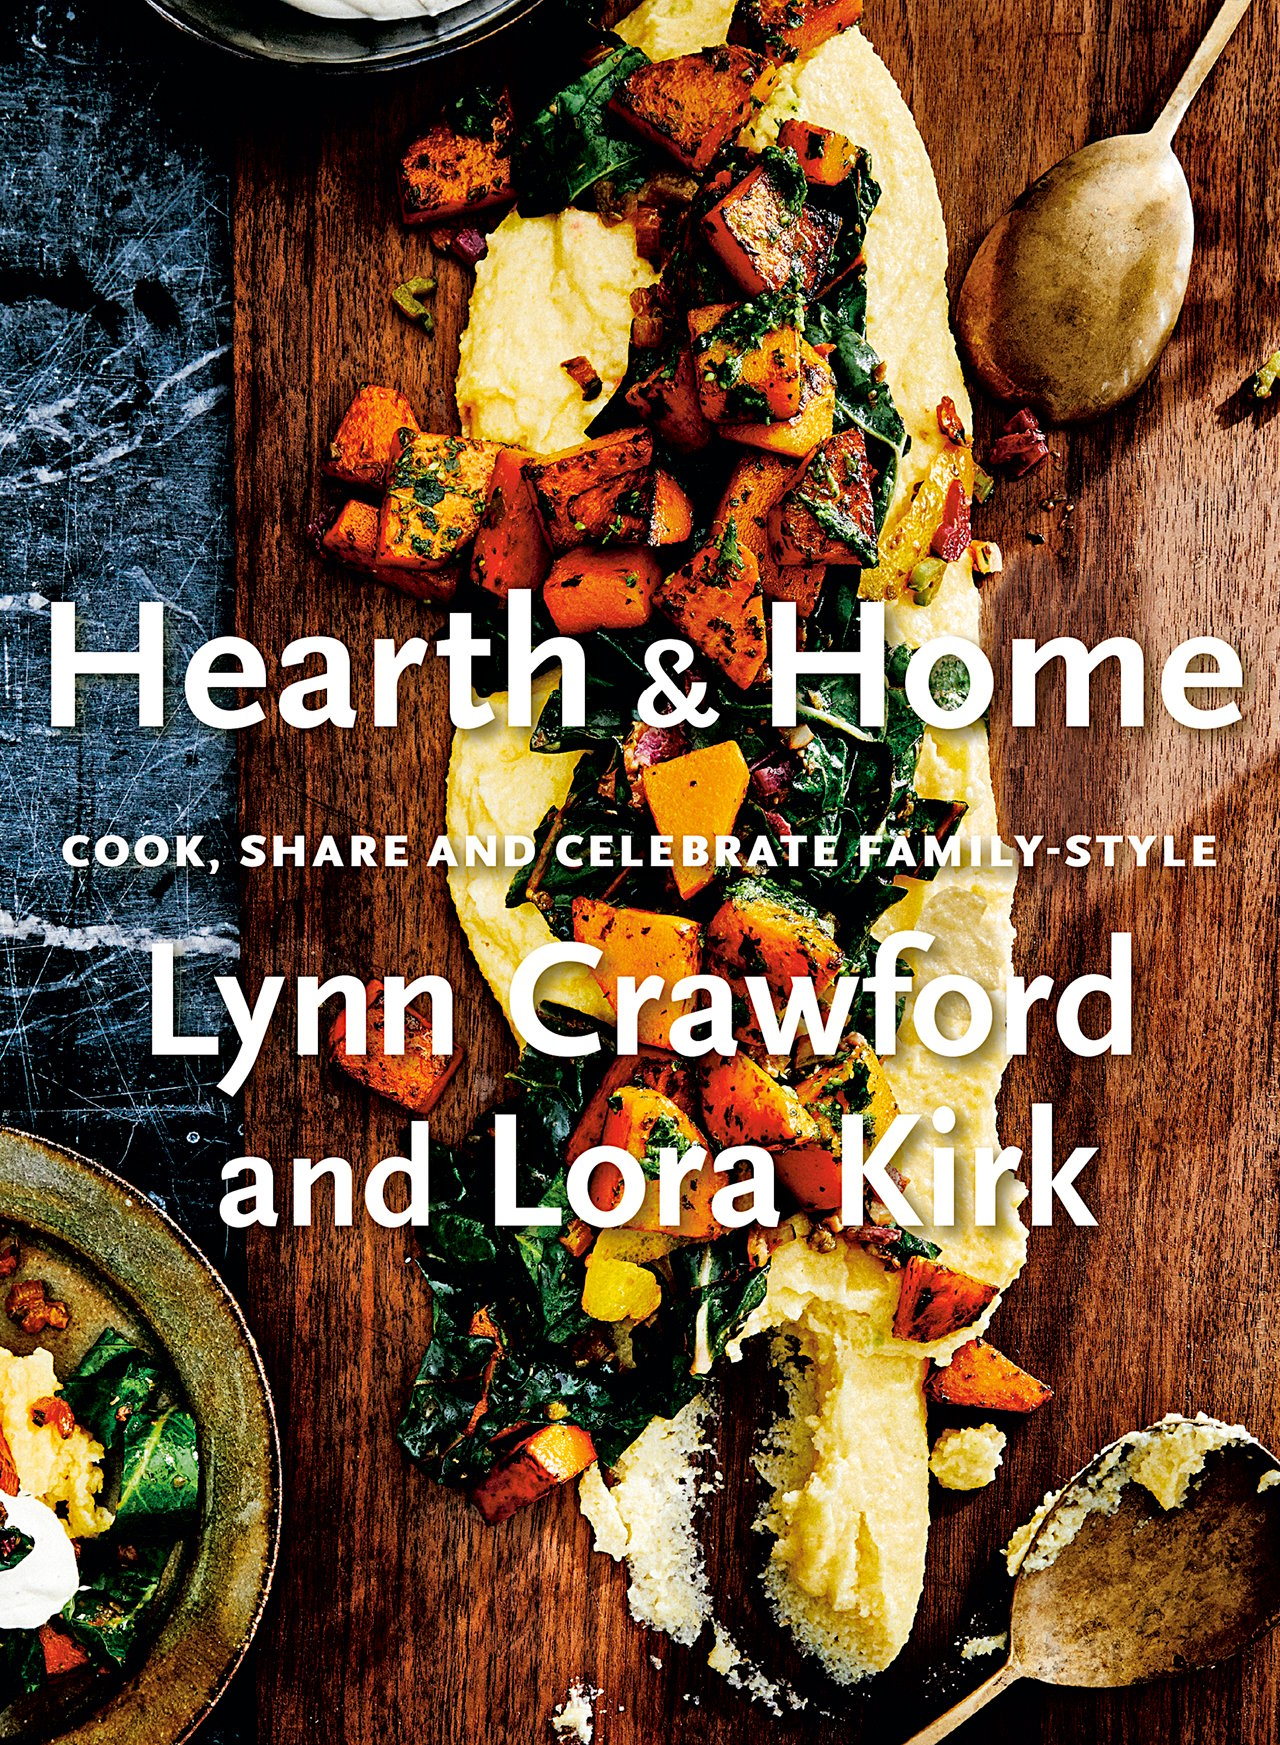 Hearth & Home by Lynn Crawford and Lora Kirk